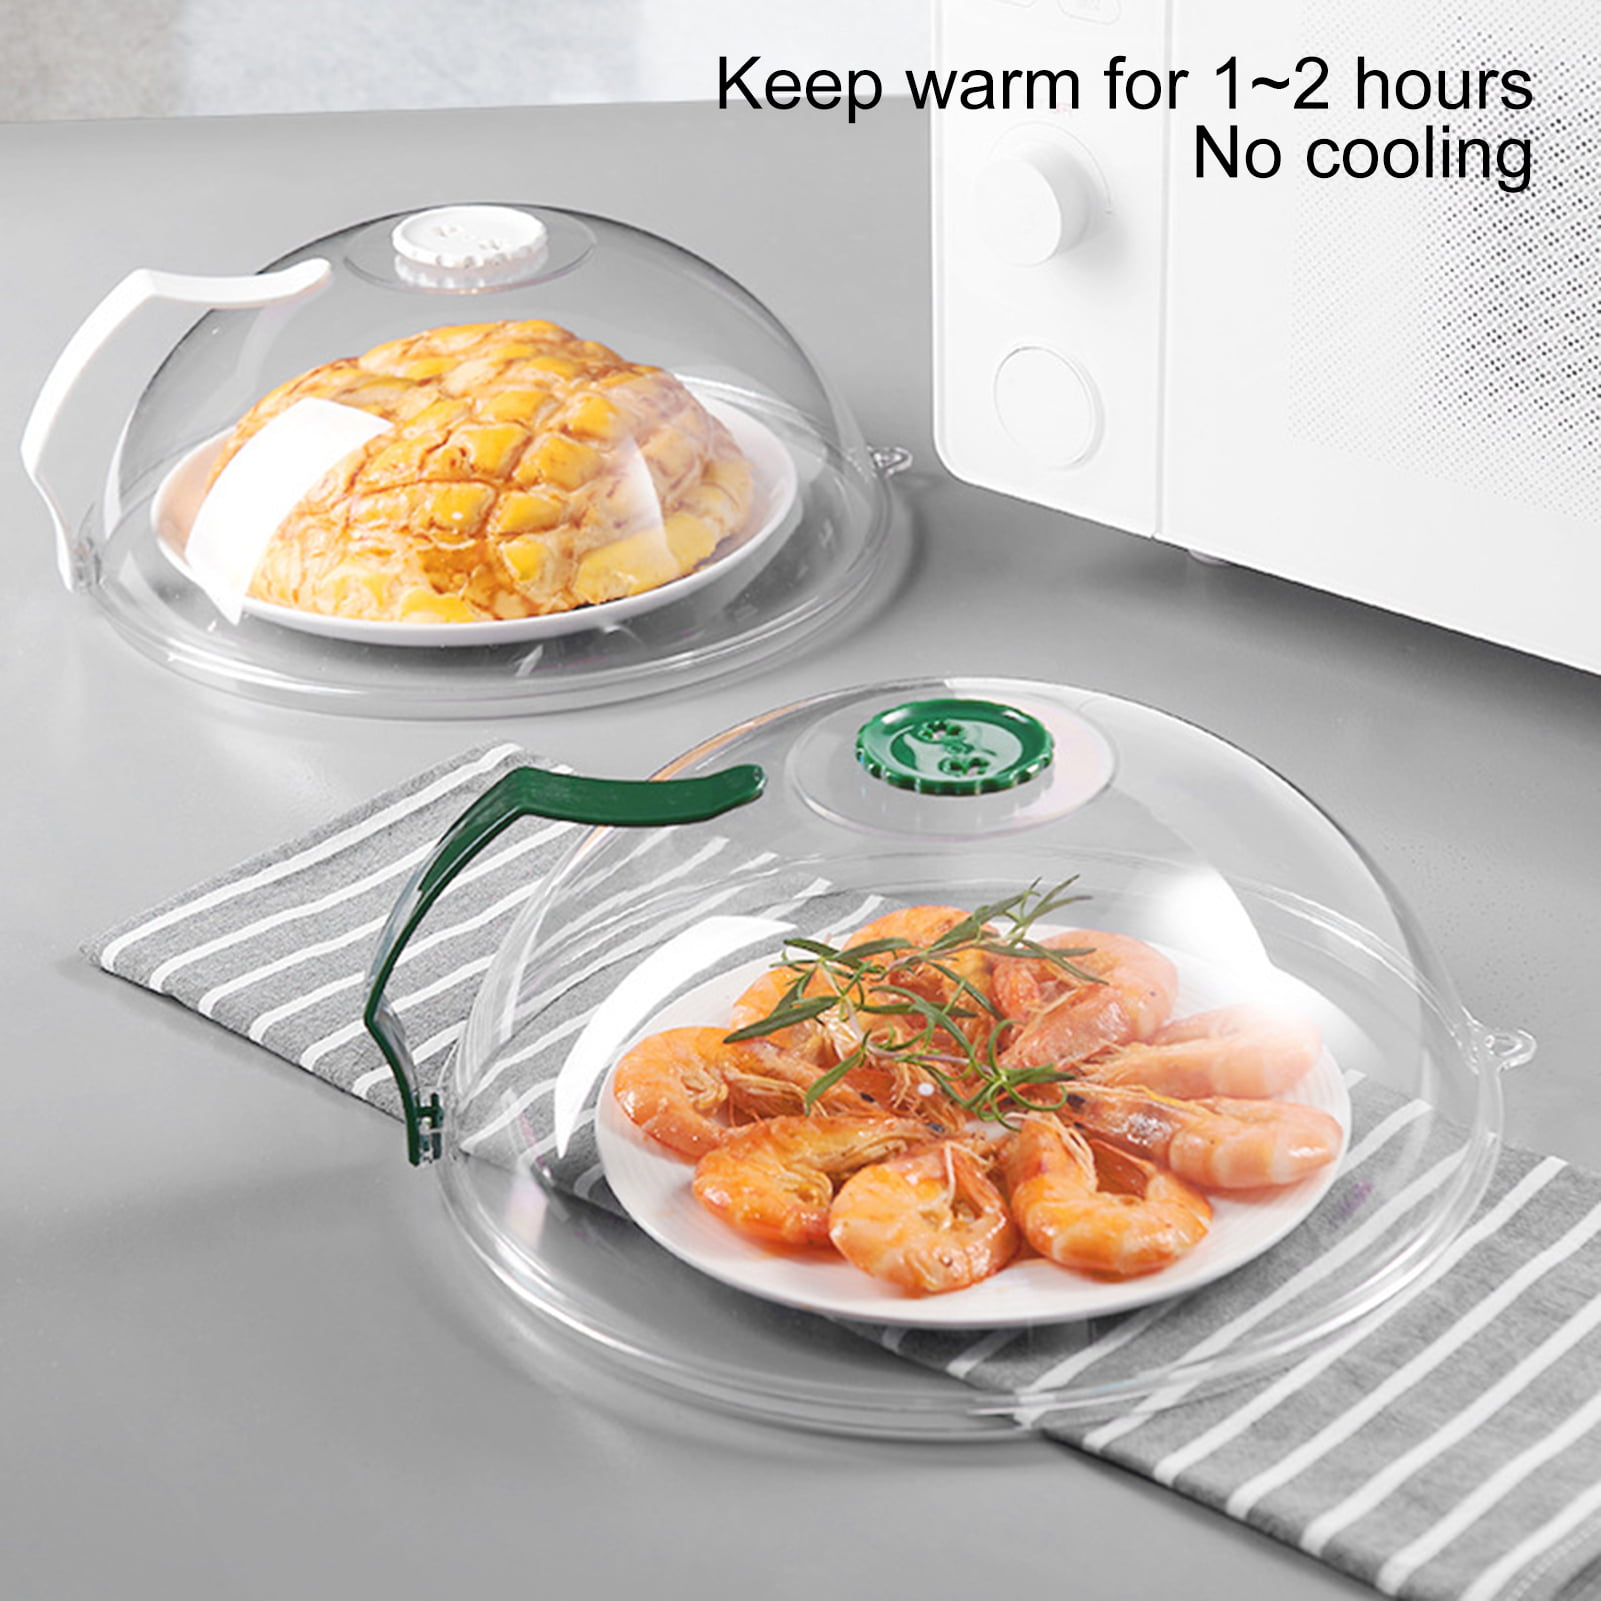 1pc Microwave Splatter Cover, Microwave Cover for Food, Large Microwave  Plate Cover Guard Lid with Steam Vents Keeps Microwave Oven Clean, Microwave  Oven Heating Cover - Splash Proof, Oil Proof, Fresh-Keeping Cover